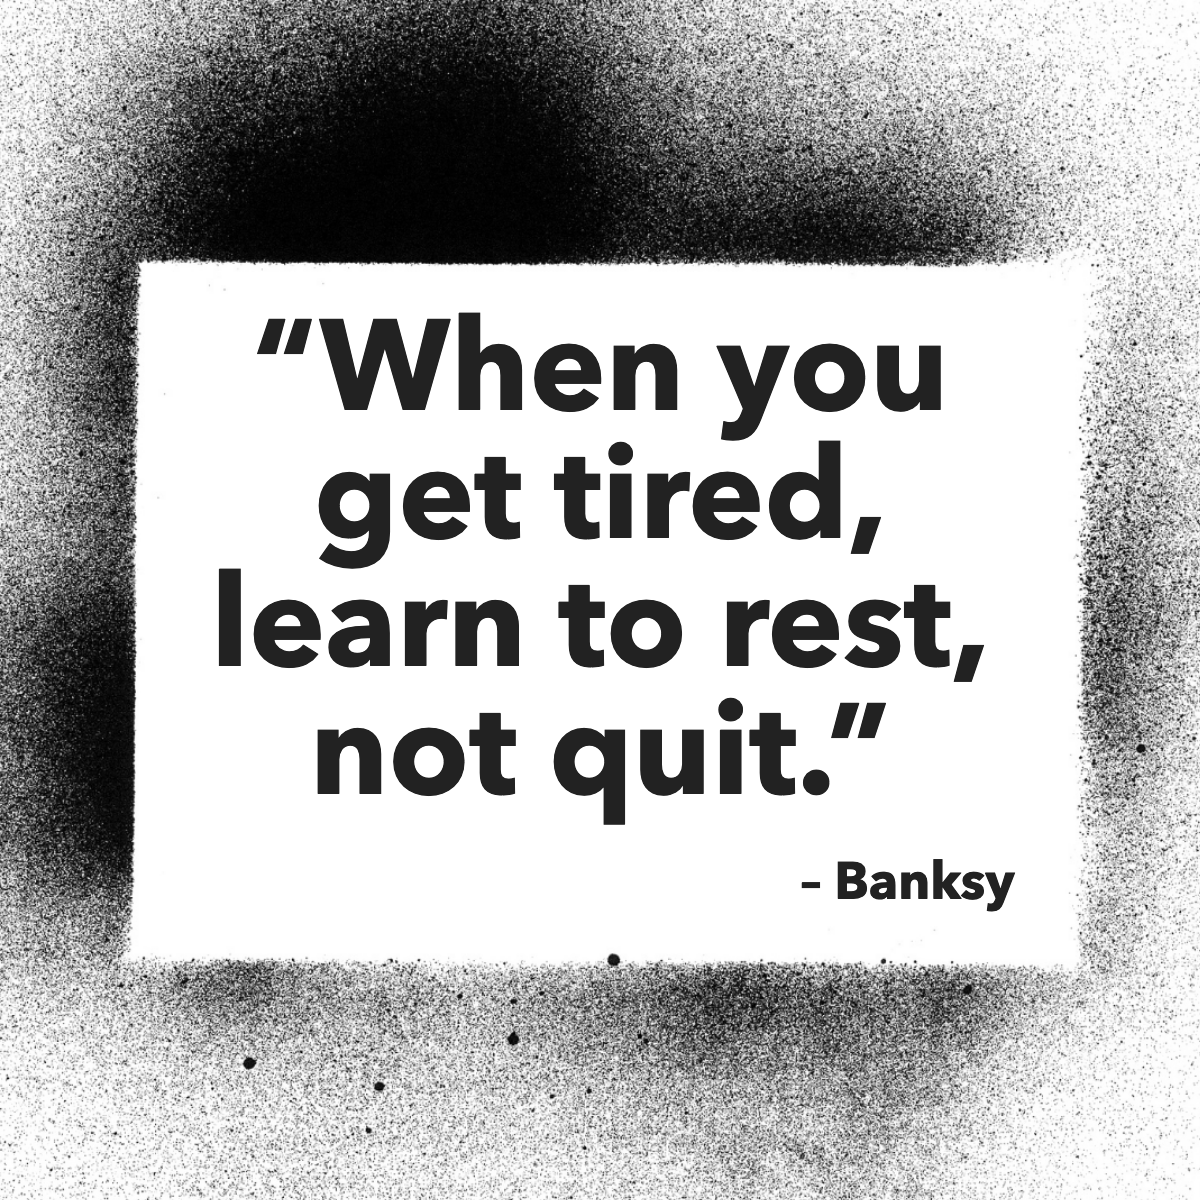 Don't feel guilty if you ever get tired, take your time ... 😉

#motivationnation #motivationalquotesdaily #quoteoftheday #quoteofday #quotedaily

 #realtor #homes #realestate #searchwvproperties #homesforsale #wvhomesforsale #jeffersoncountywv #berkeleycountywv